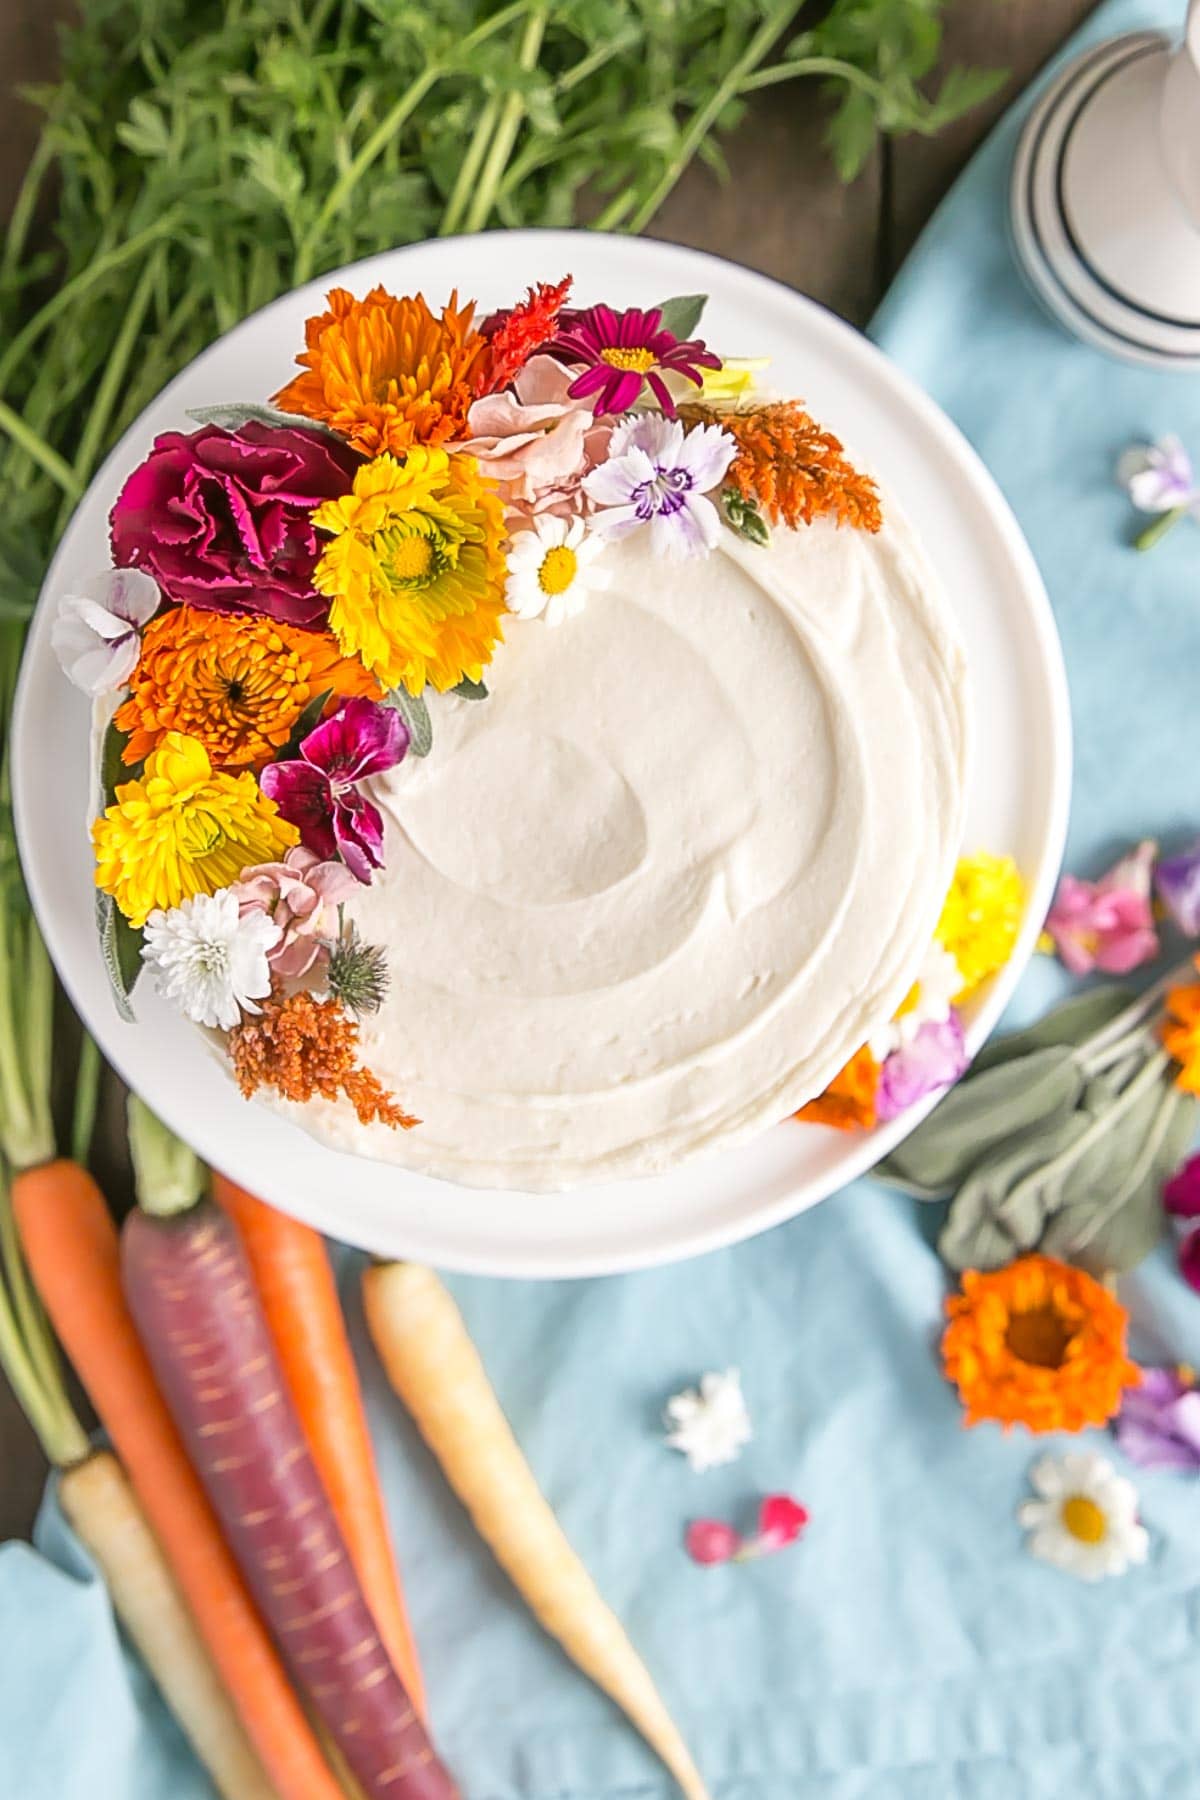 Top down picture of carrot cake with edible flowers.